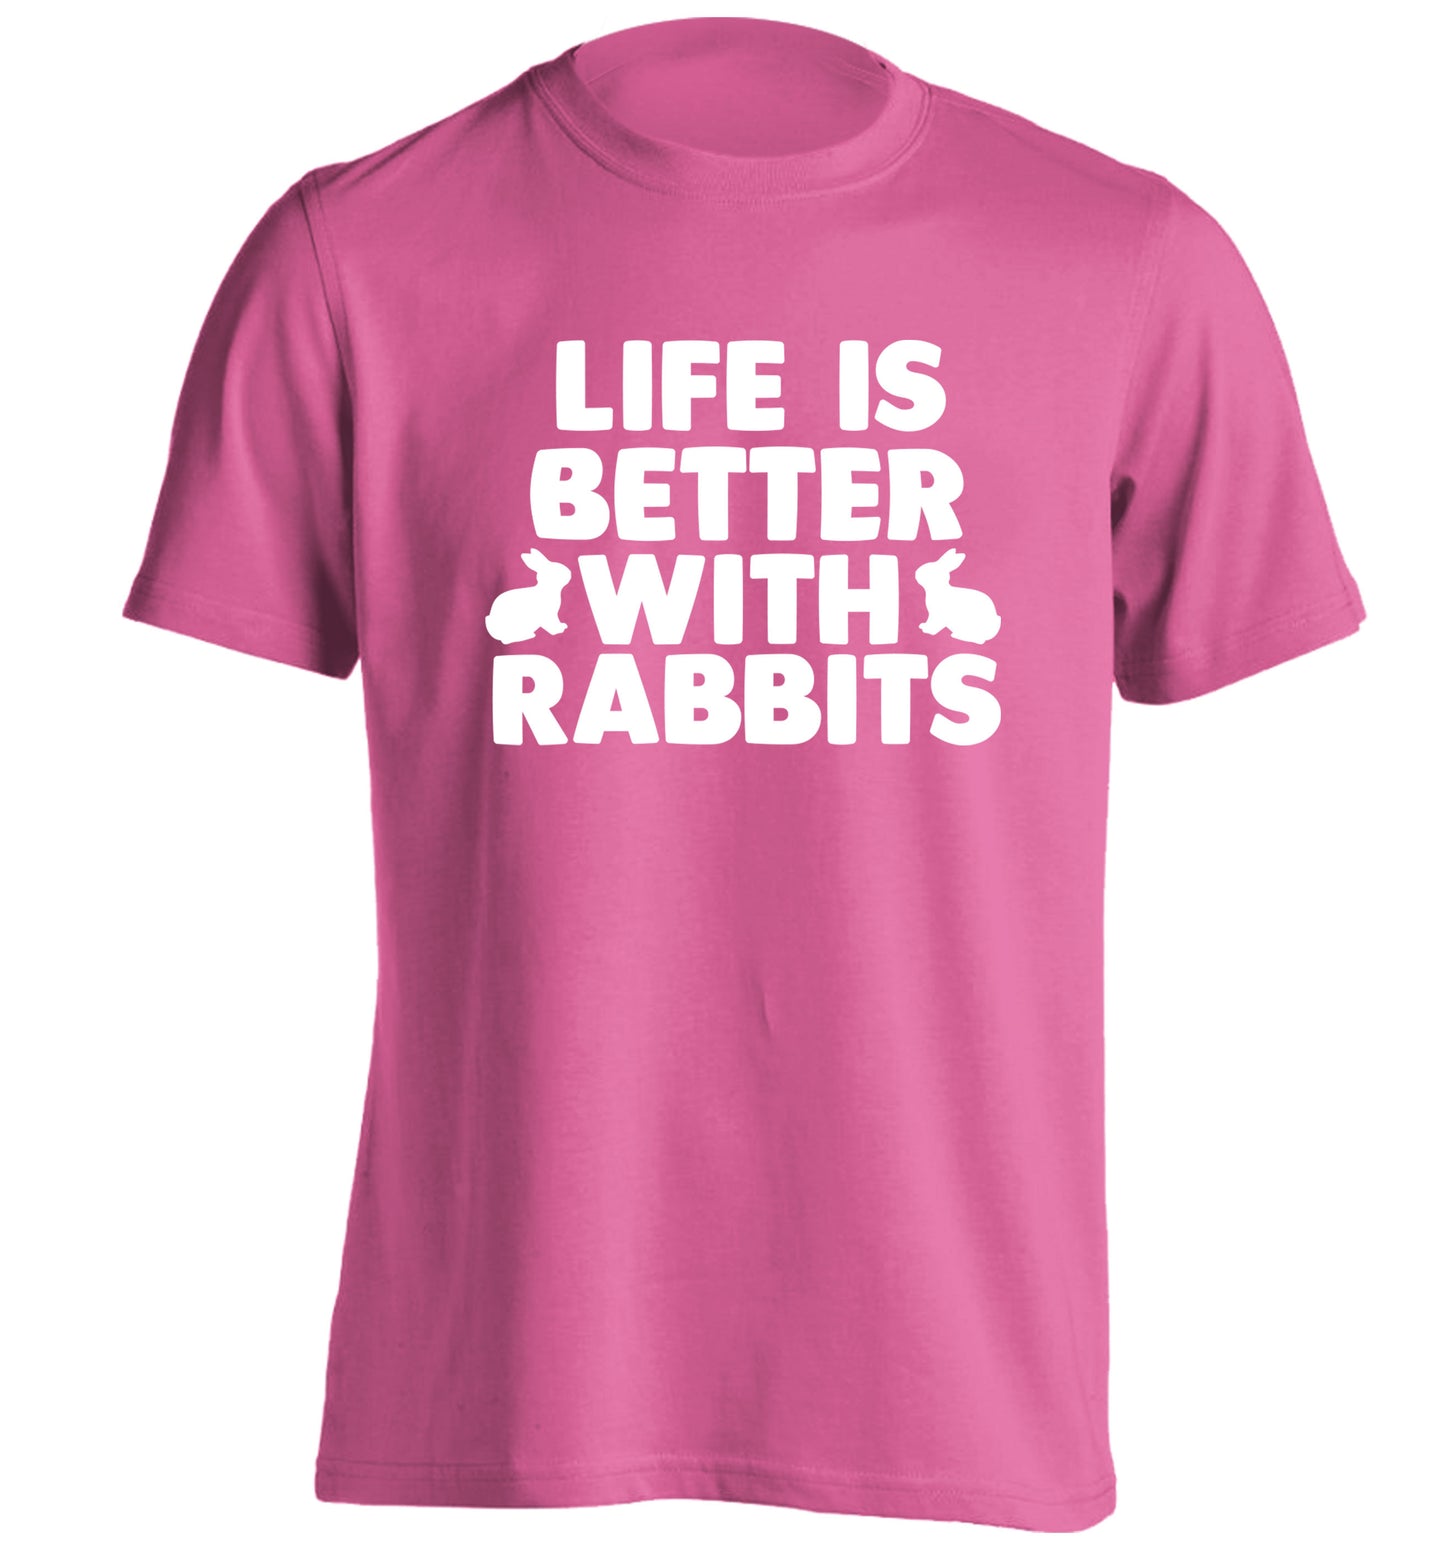 Life is better with rabbits adults unisex pink Tshirt 2XL